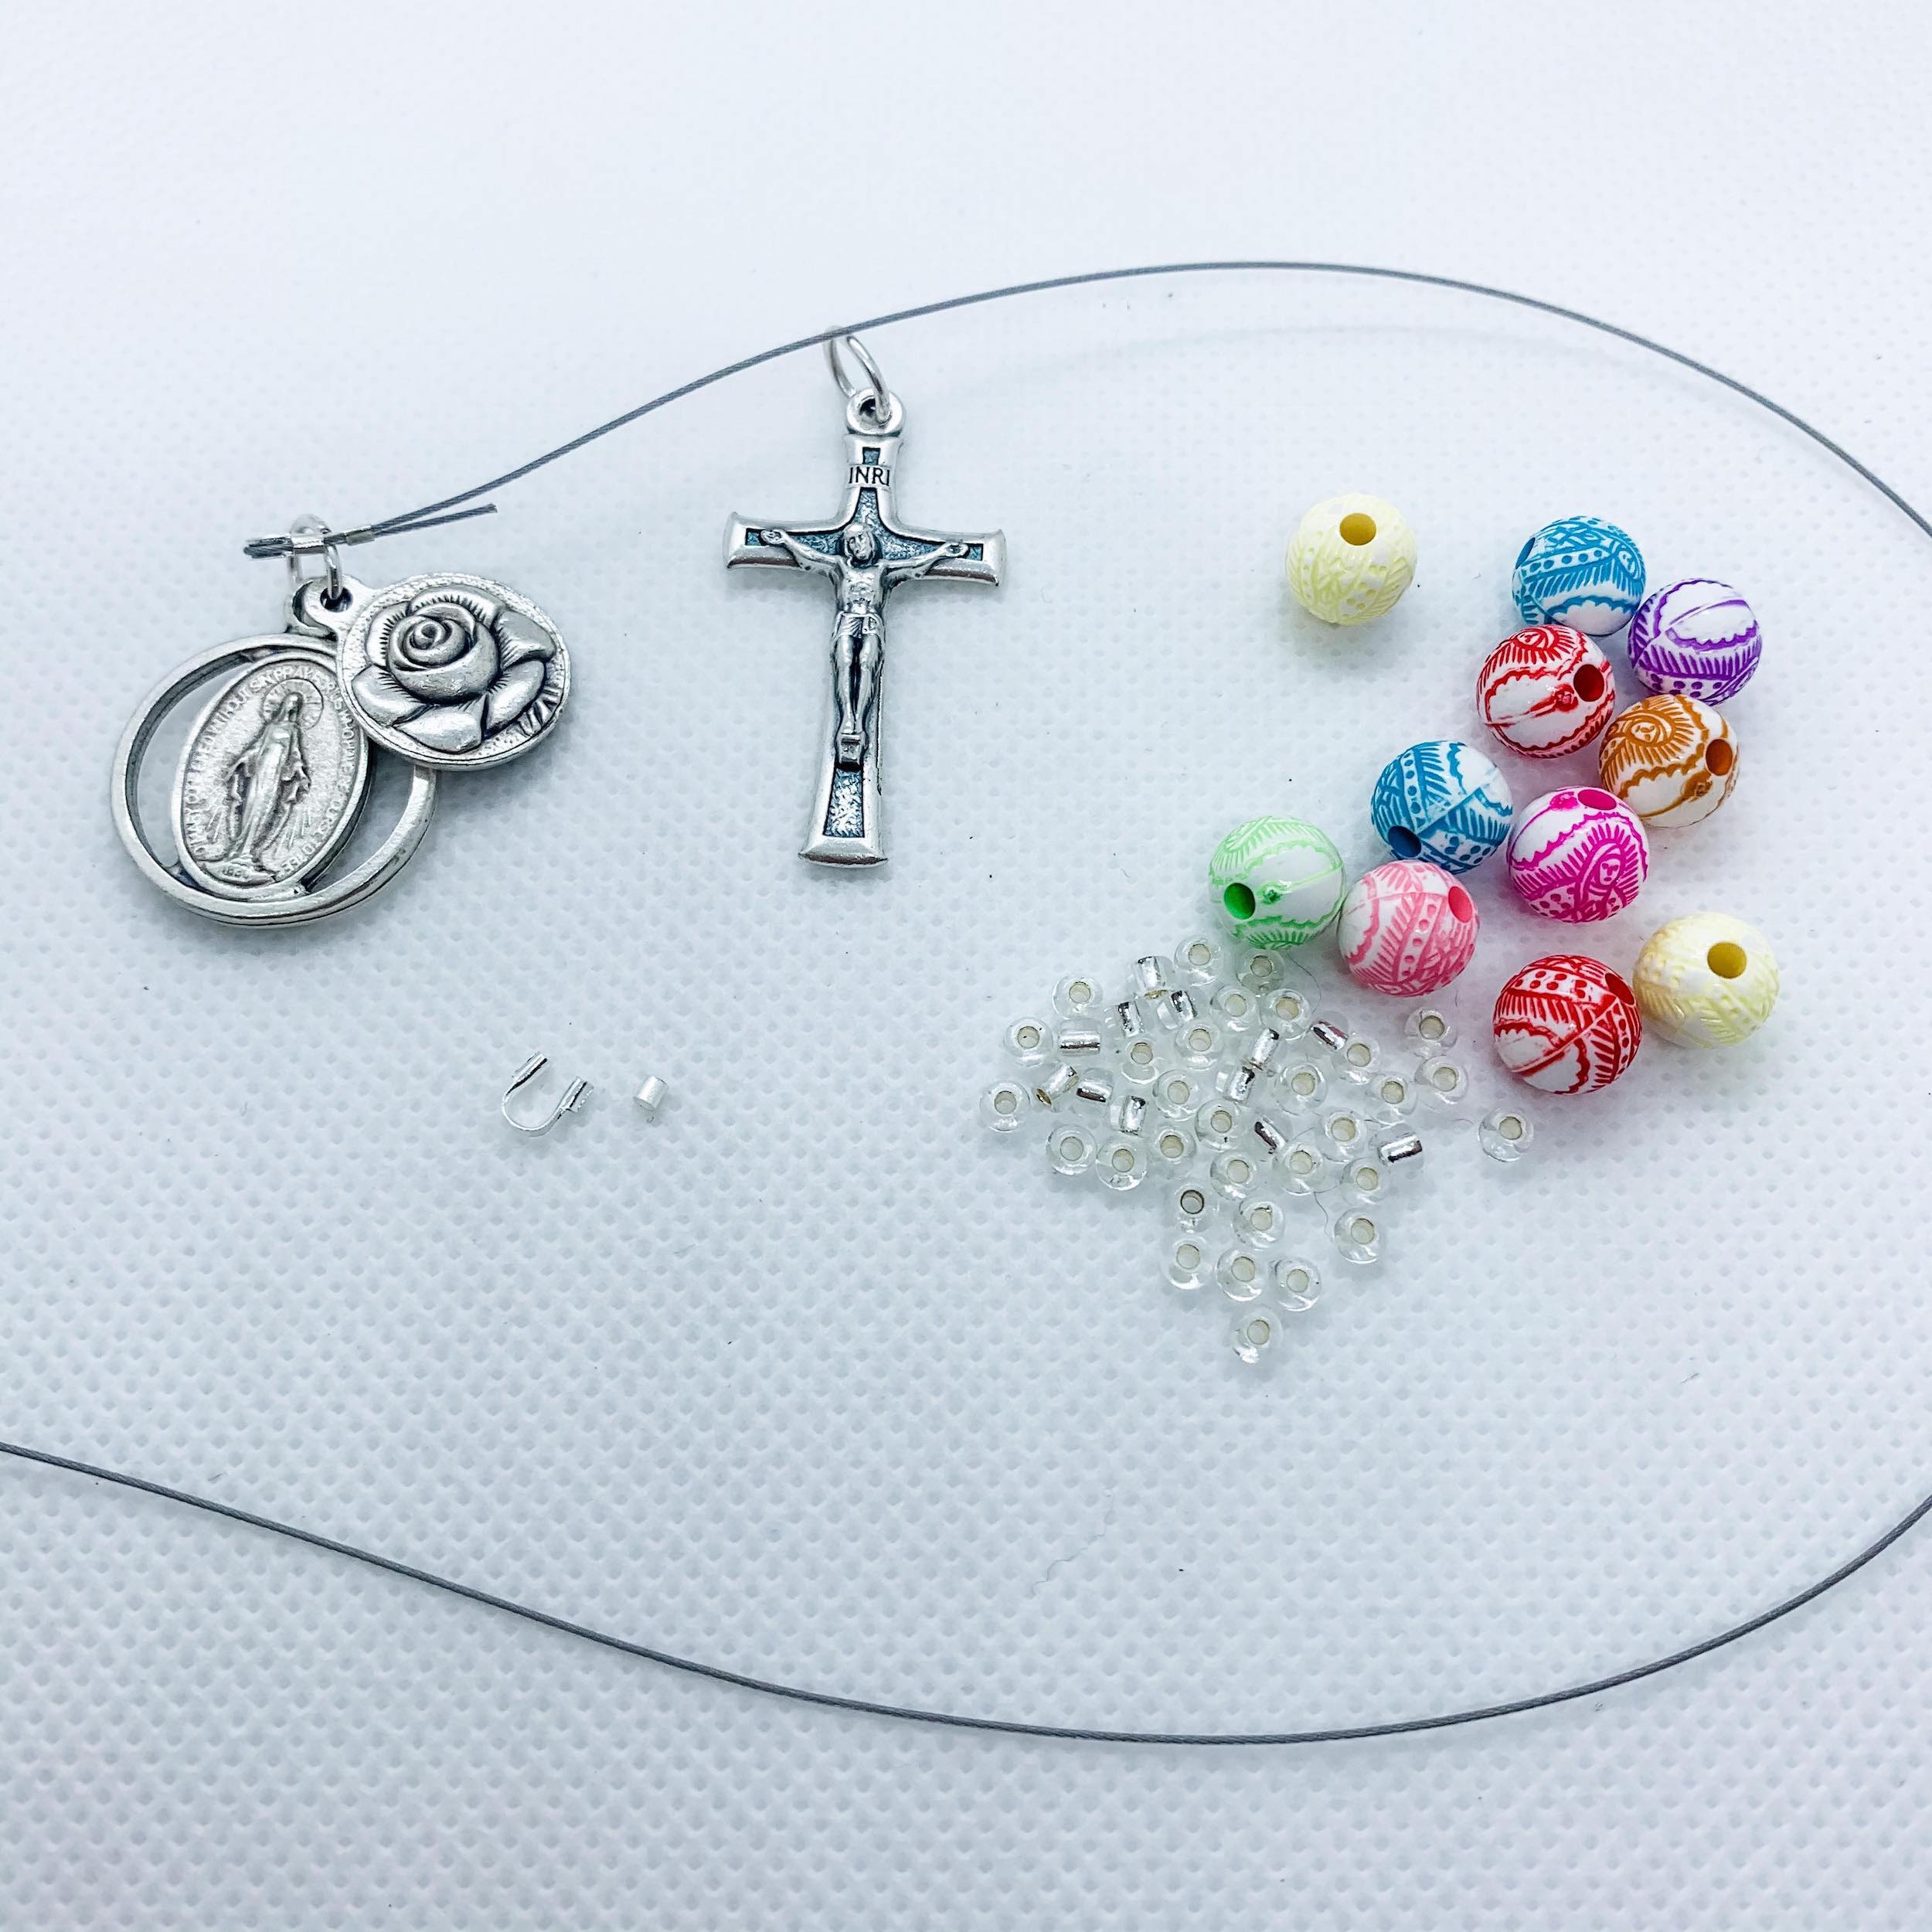 Best Rosary making kit. Enough for 8 rosaries! #11-11-1 p